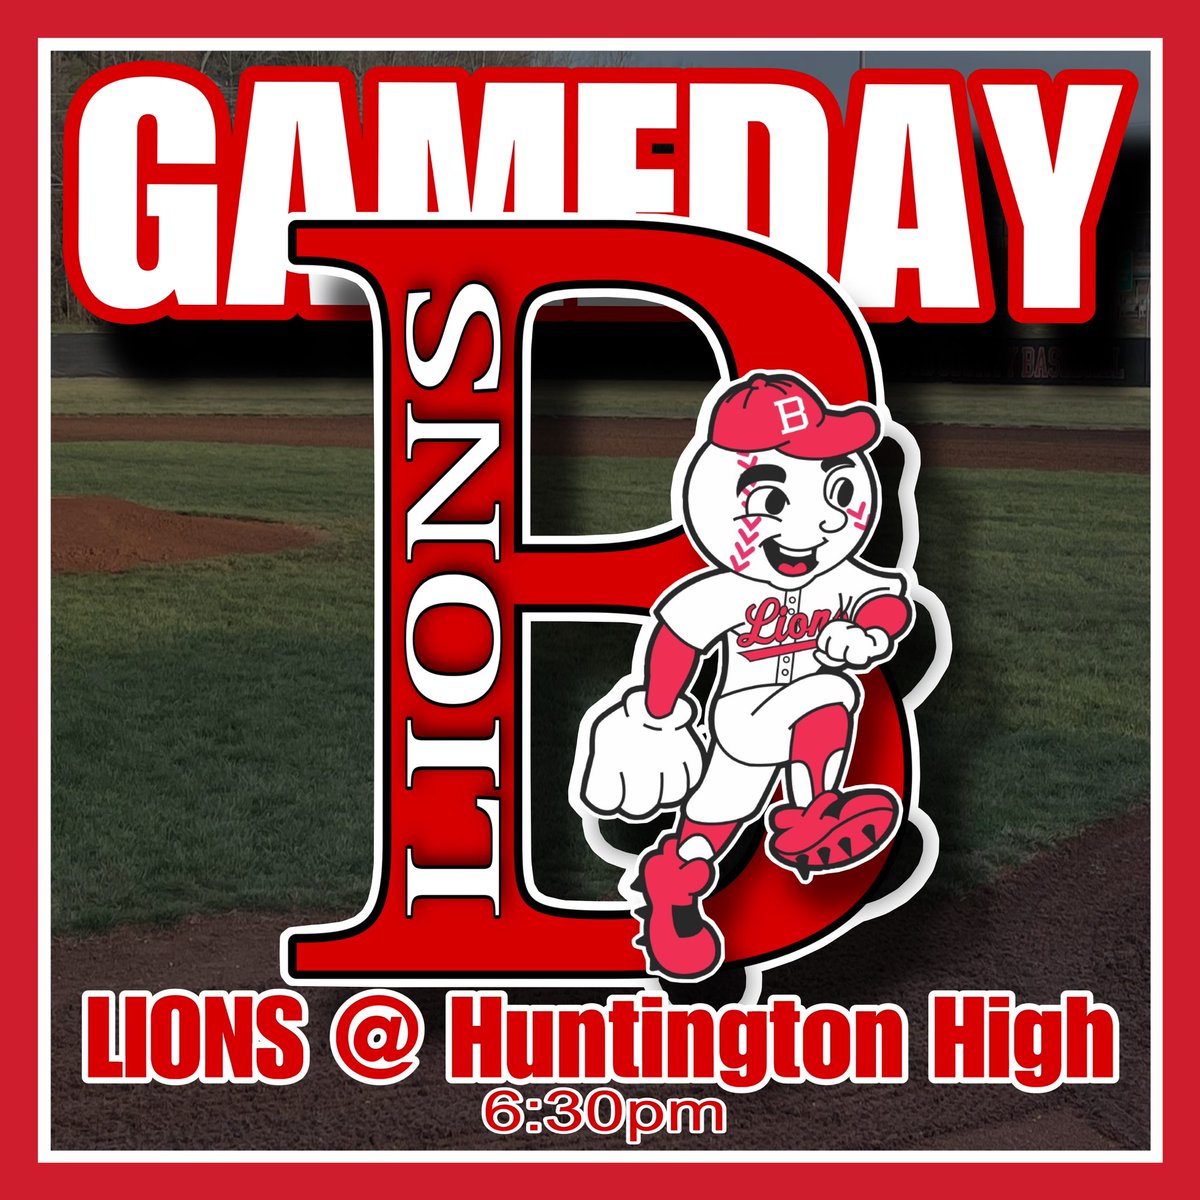 GAMEDAY: The #CountyBoys are headed to Huntington to play the Highlanders this evening. First pitch at 6:30pm